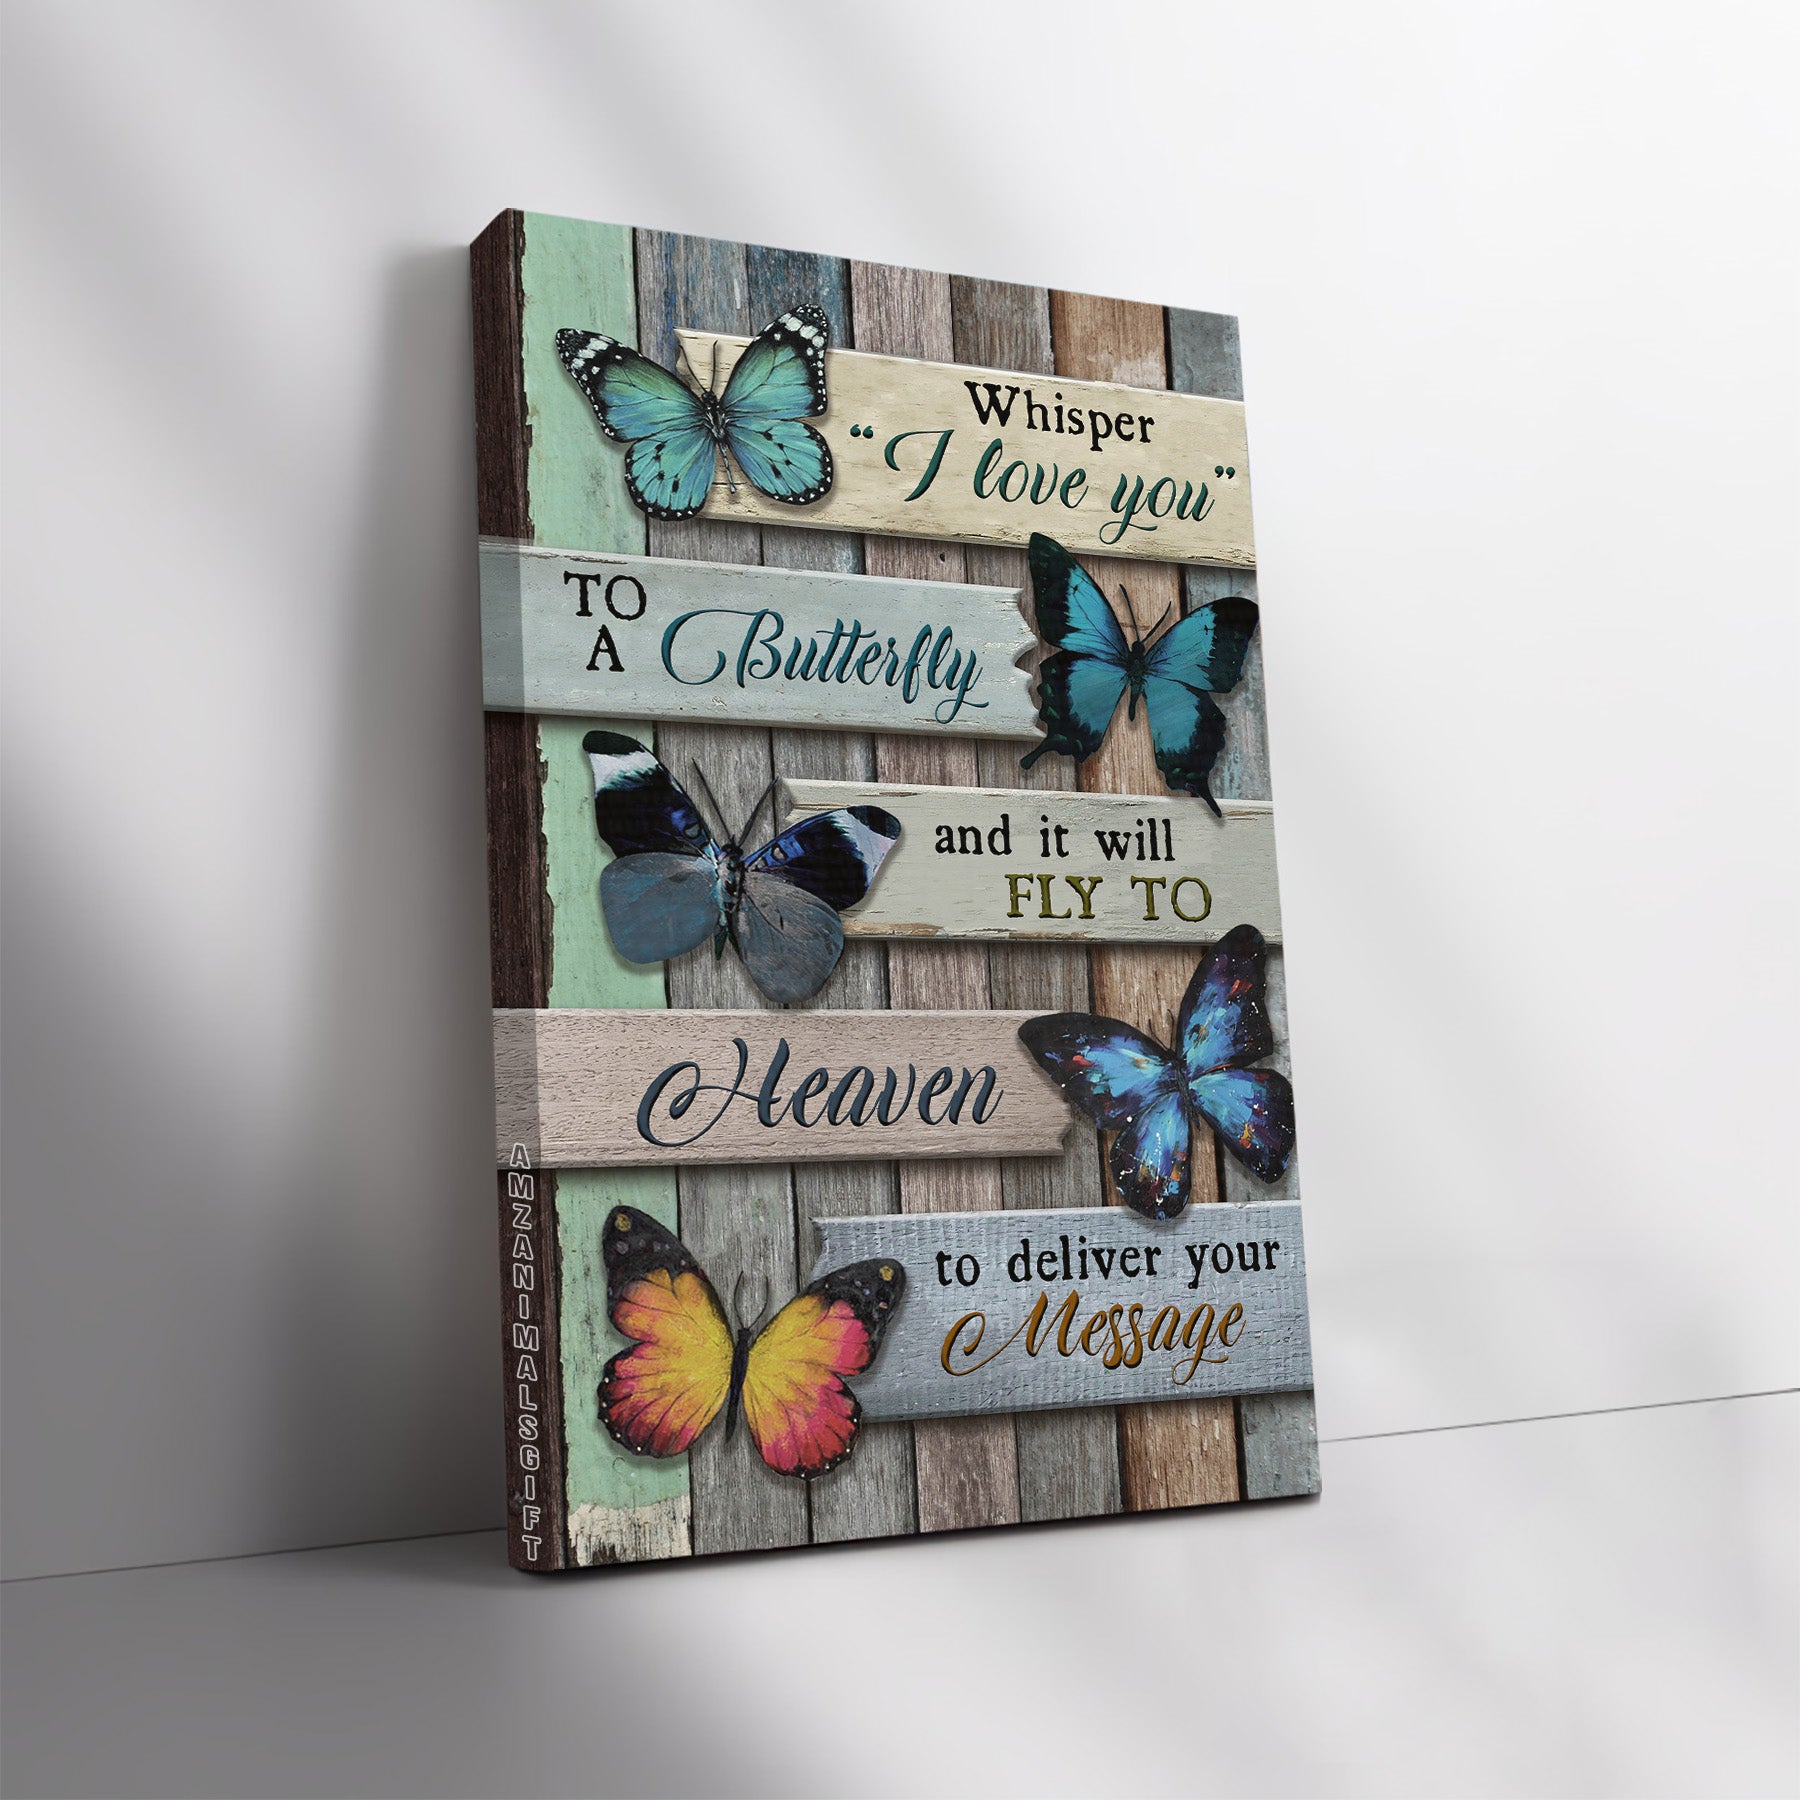 Memorial Premium Wrapped Portrait Canvas - Beautiful Butterfly, Vintage Picture, Whisper, I Love You - Heaven Gift For Members Family